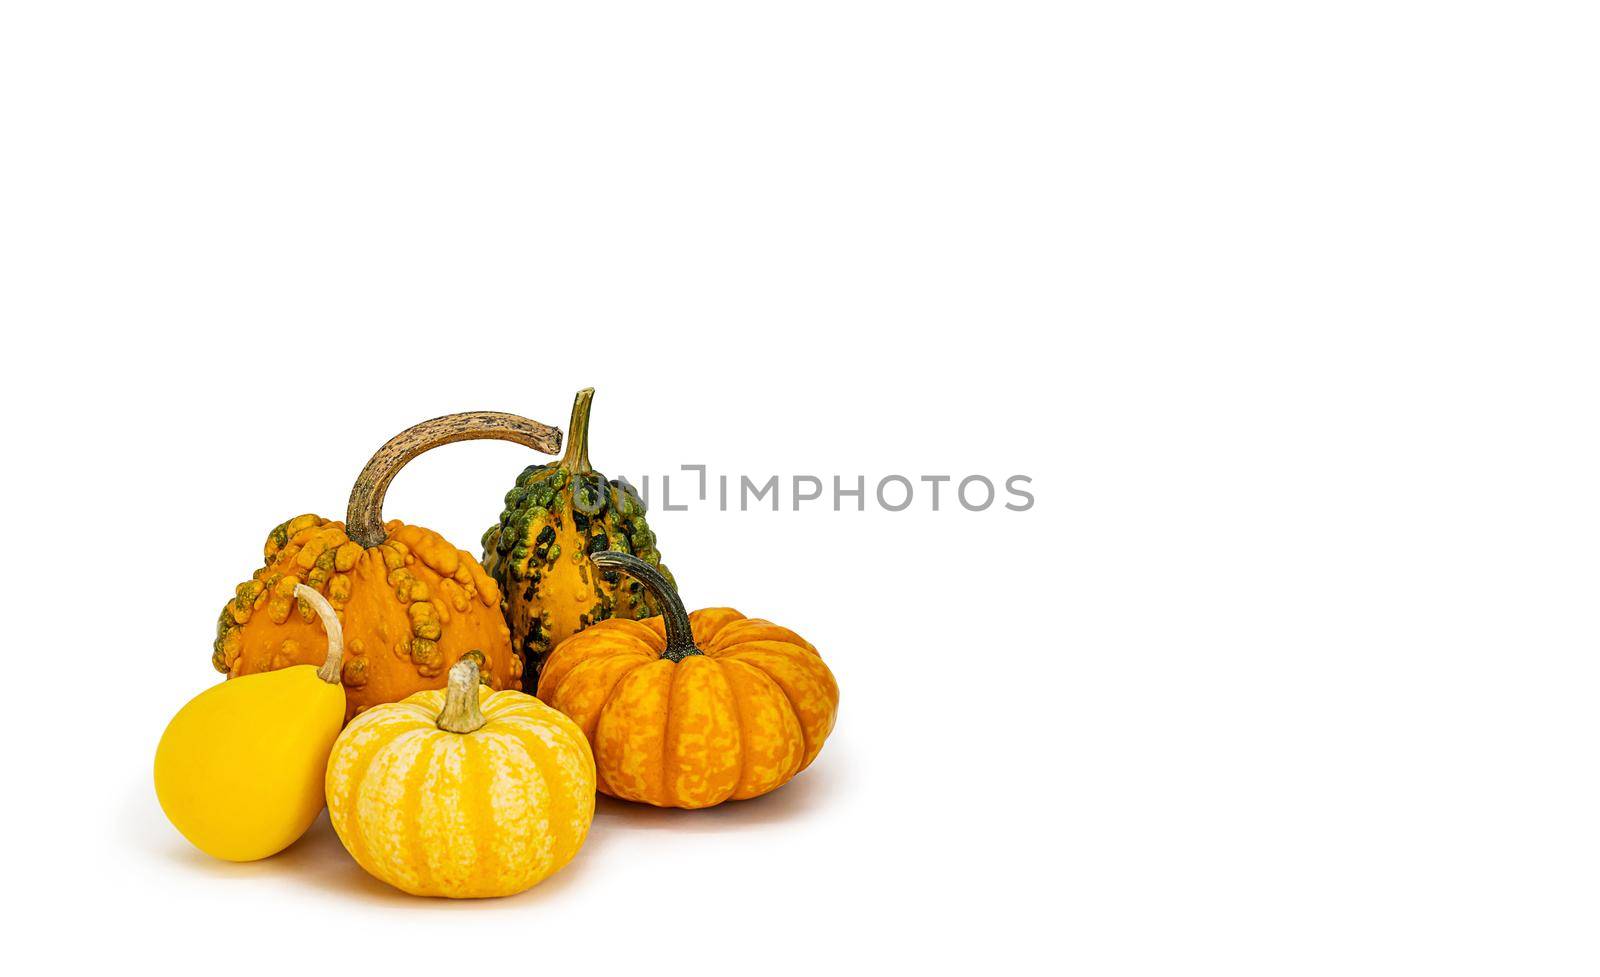 banner, bunch of decorative pumpkins on white background Isolated object, easy to cut out for design, poster. Seasonal decorative vegetables for Thanksgiving, Halloween, restaurant menu decoration